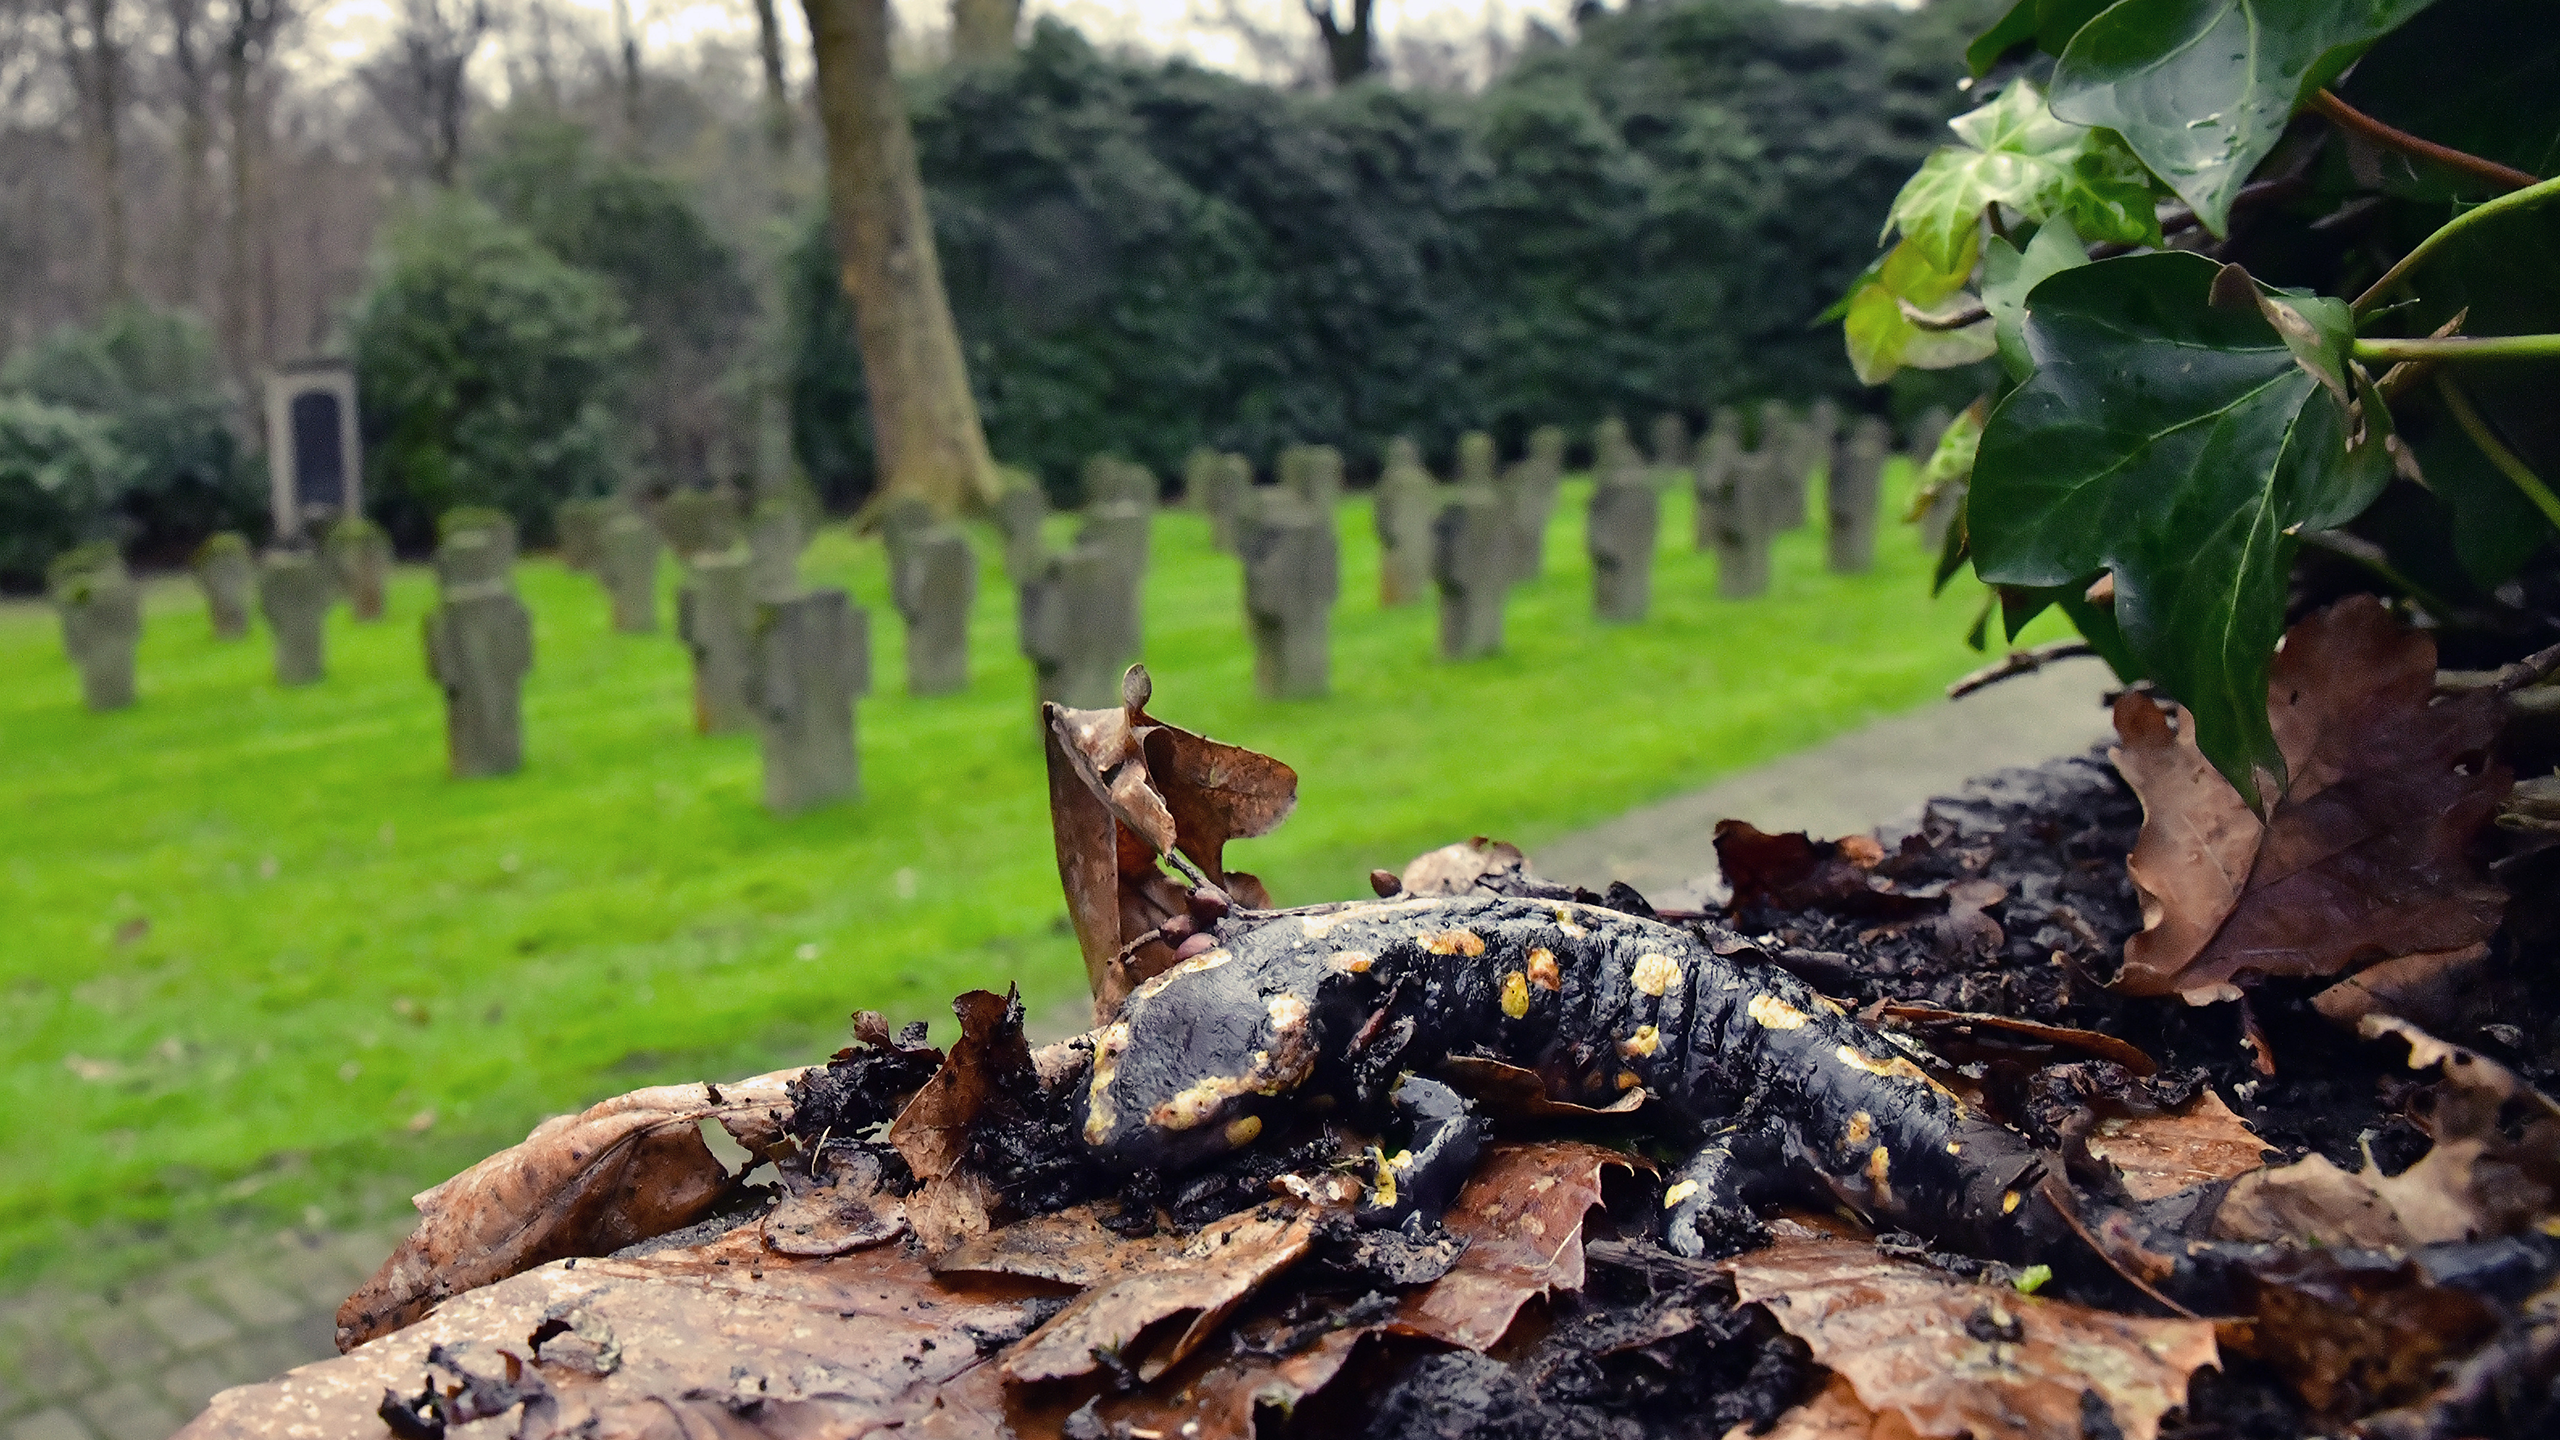 Symbolic: fire salamander perished from bsal at Essen's Southwest Cemetery | Miguel Vences